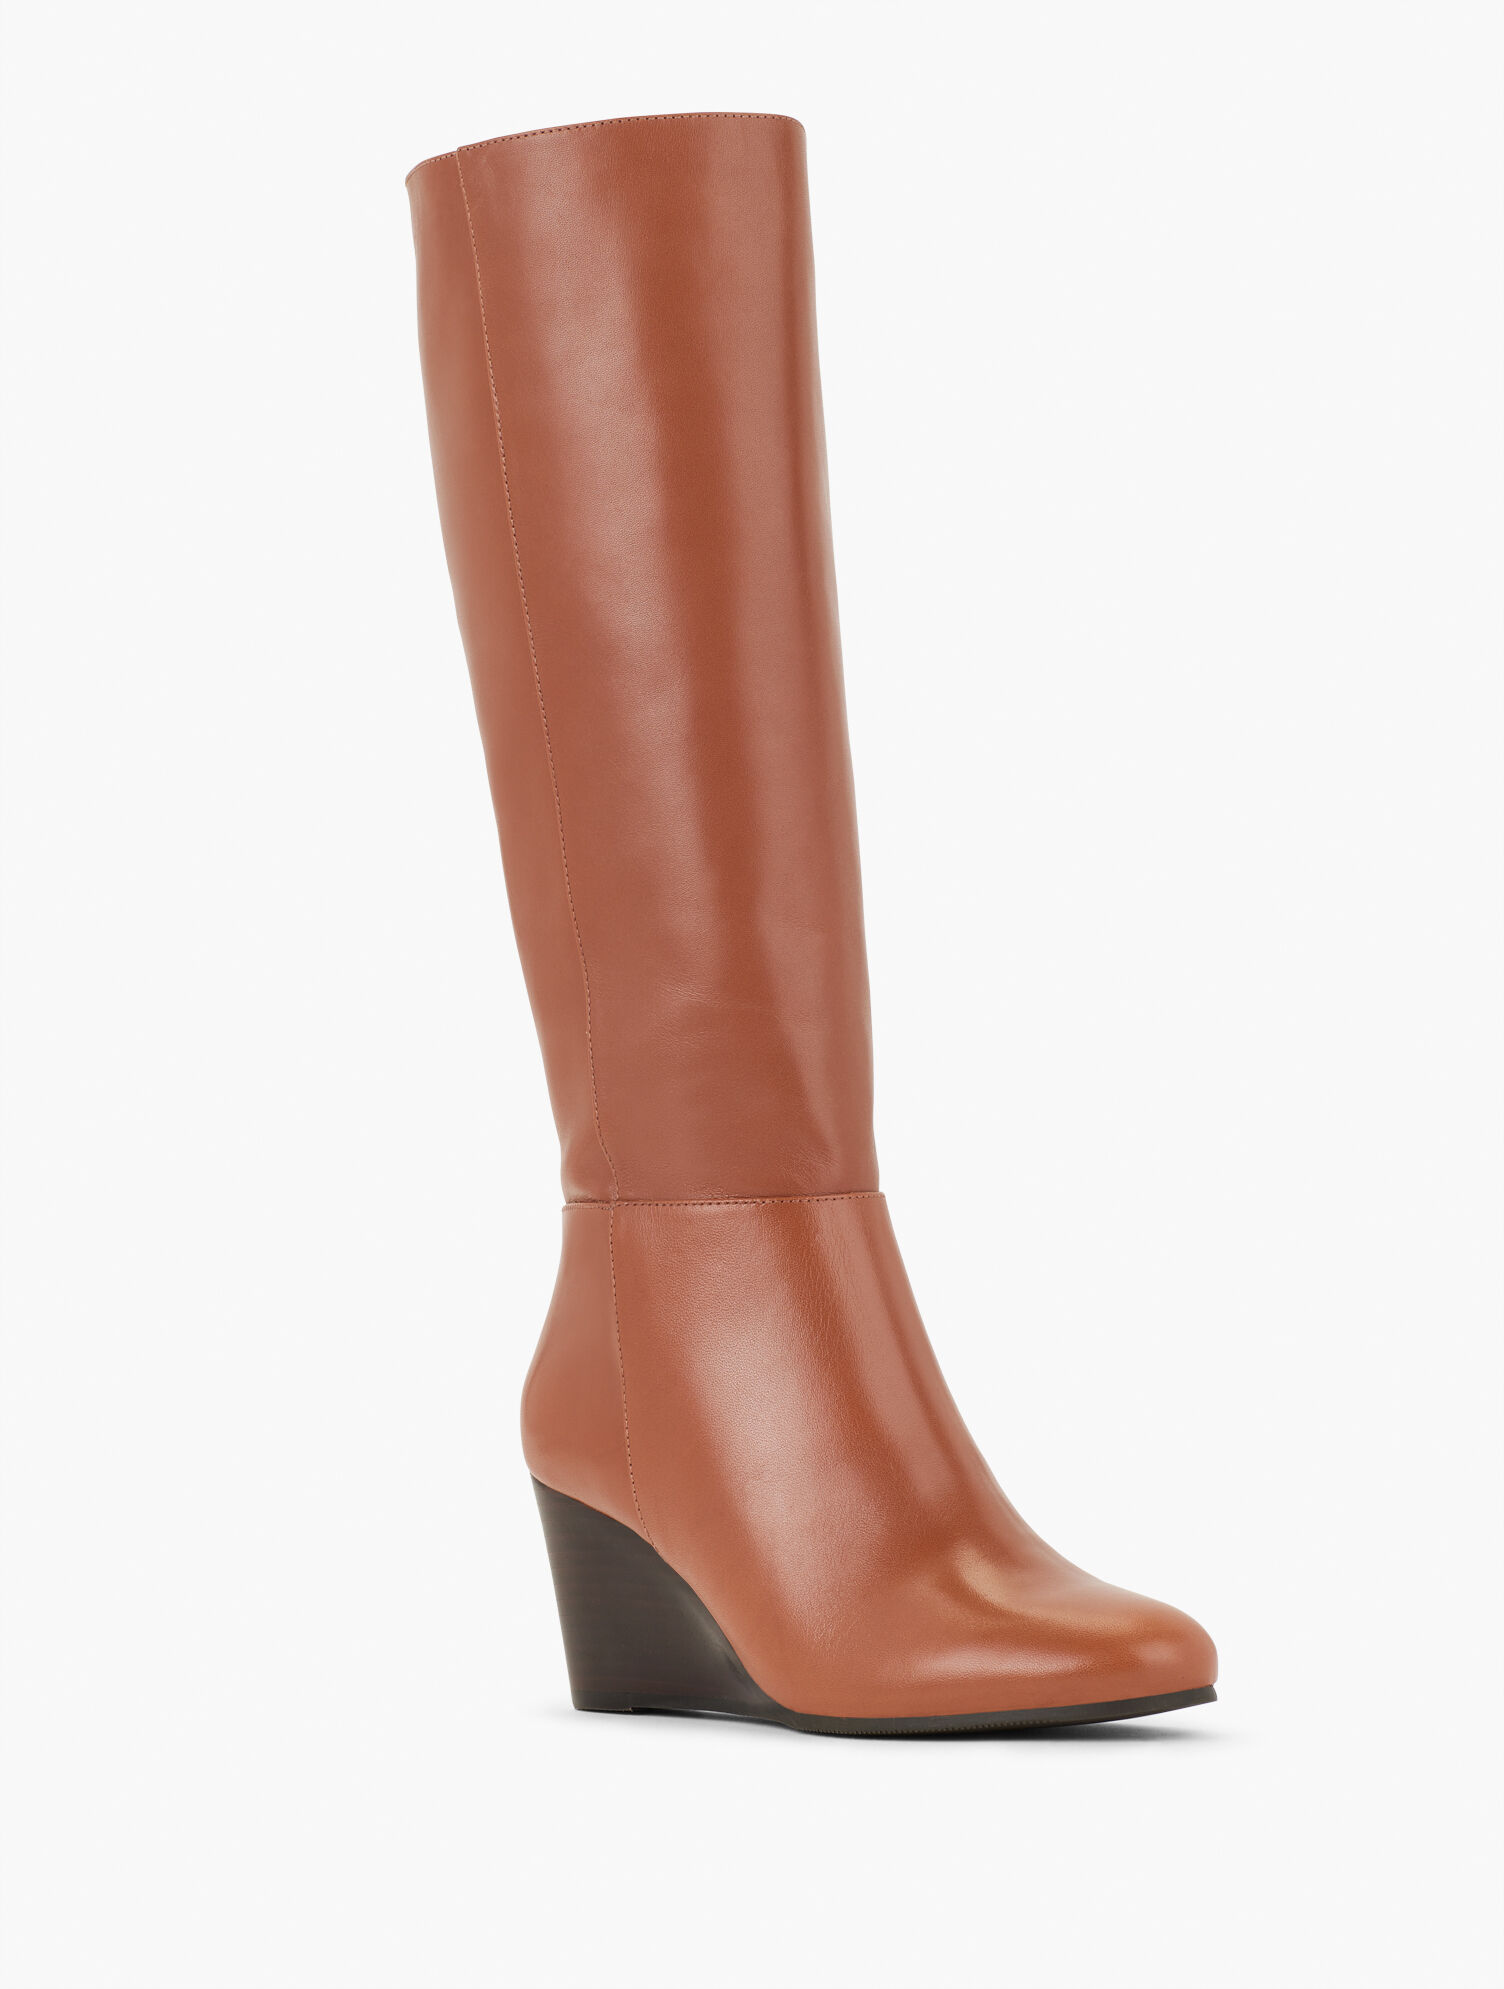 Lilia Tall Leather Wedge Boots | Talbots